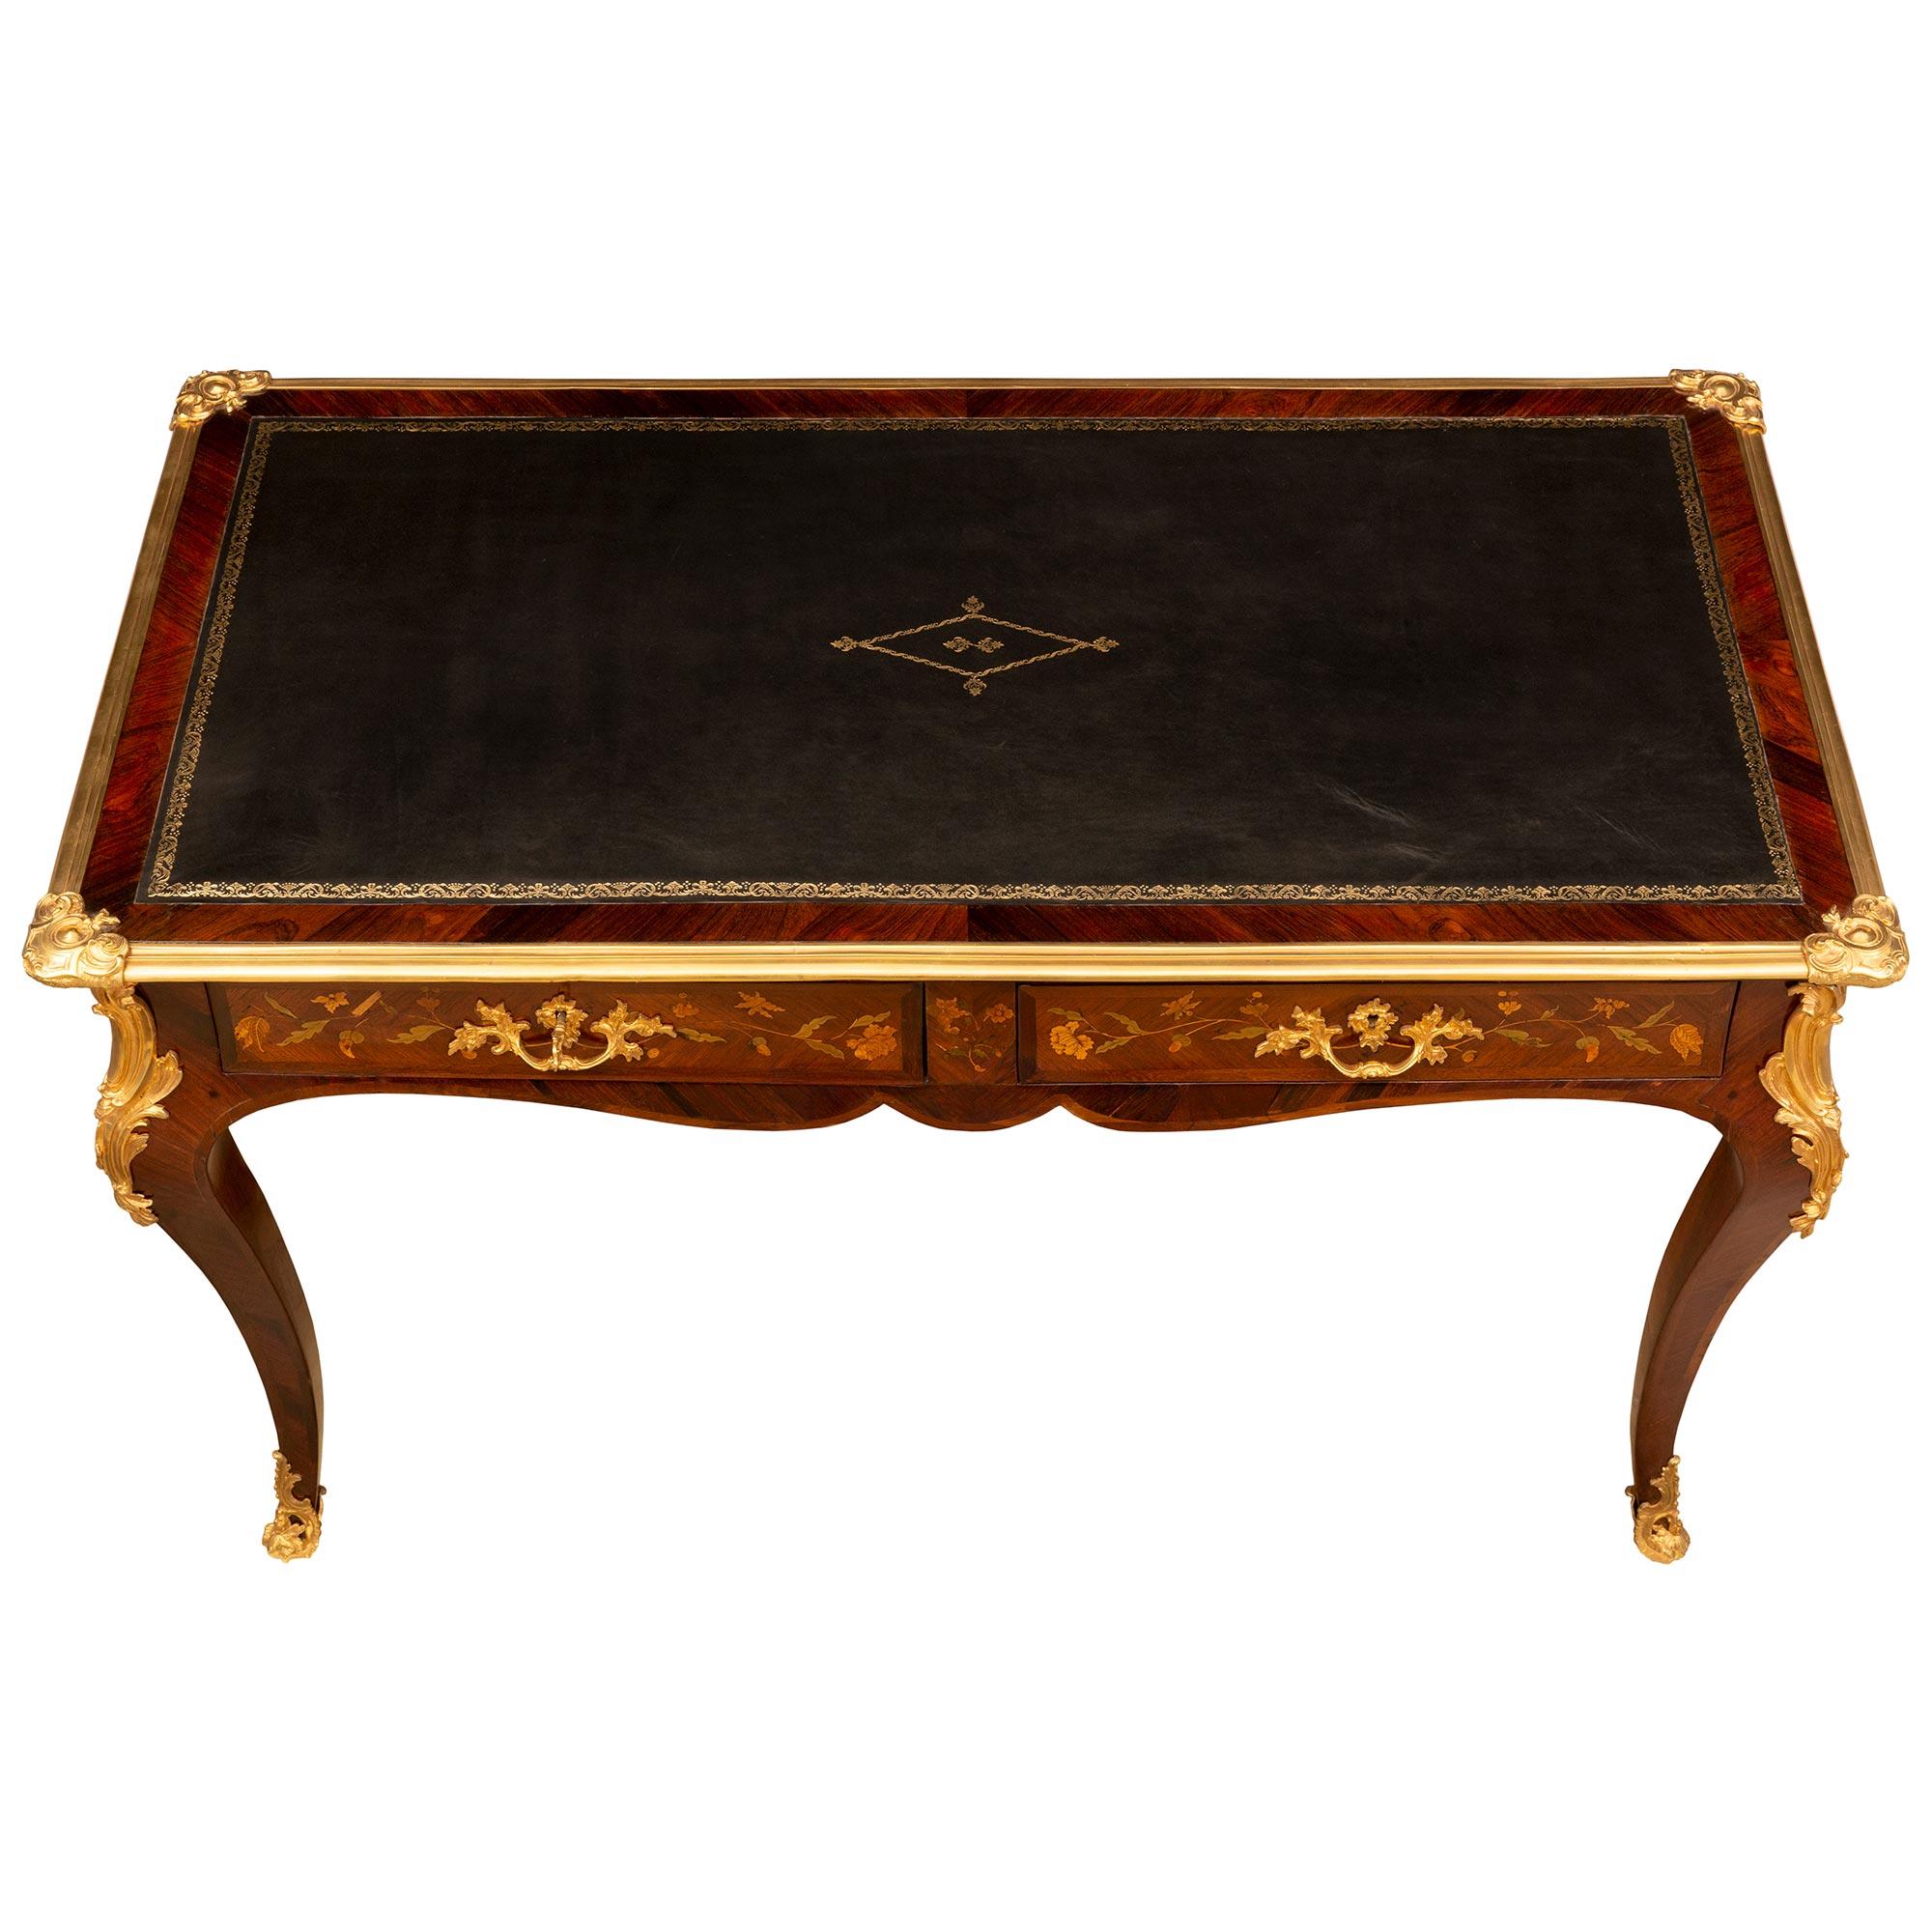 An exceptional and most elegant French early 19th century Louis XV st. Kingwood, Rosewood, exotic wood, and ormolu bureau plat desk. The desk is raised by cabriole legs with fine pierced fitted wrap around ormolu sabots and striking richly chased